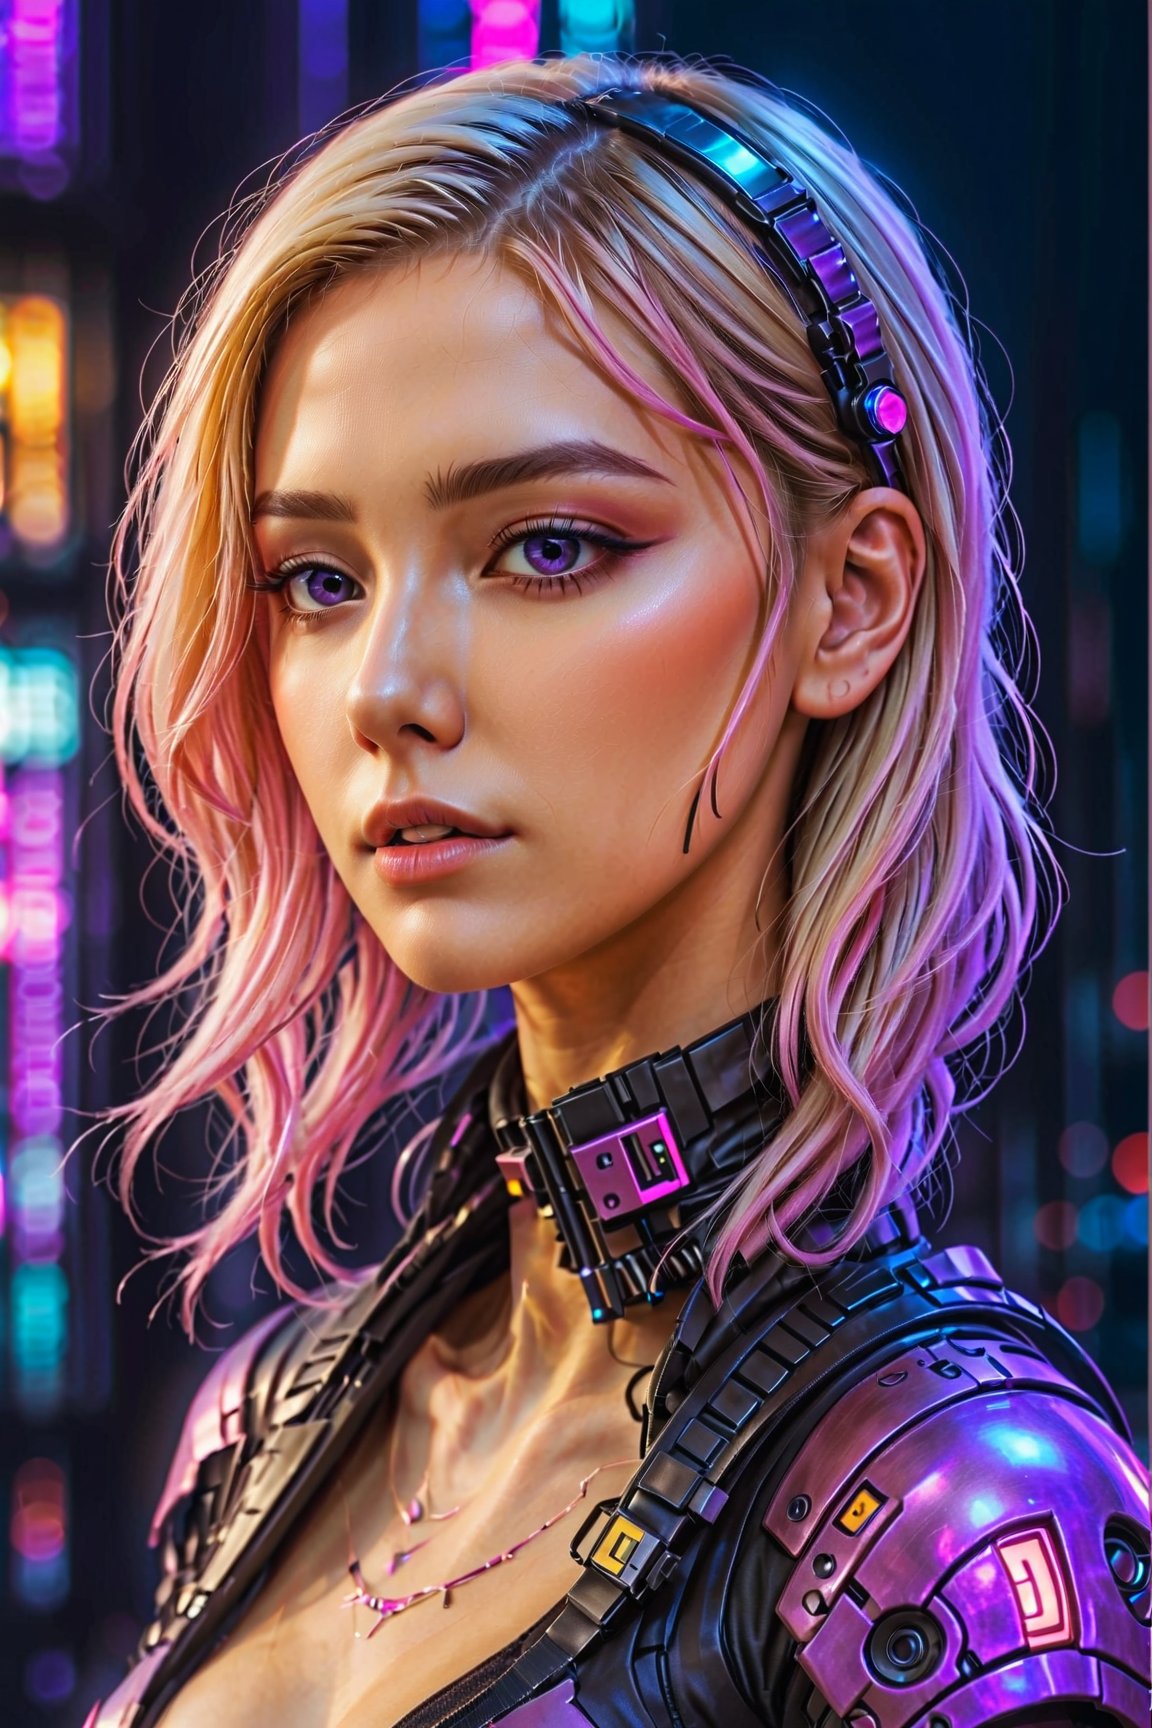 a blonde woman with hair shaved on one side and long to her chin on the other, she is about 22 years old, very cyberpunk in a futuristic universe purple and pink background with a light

